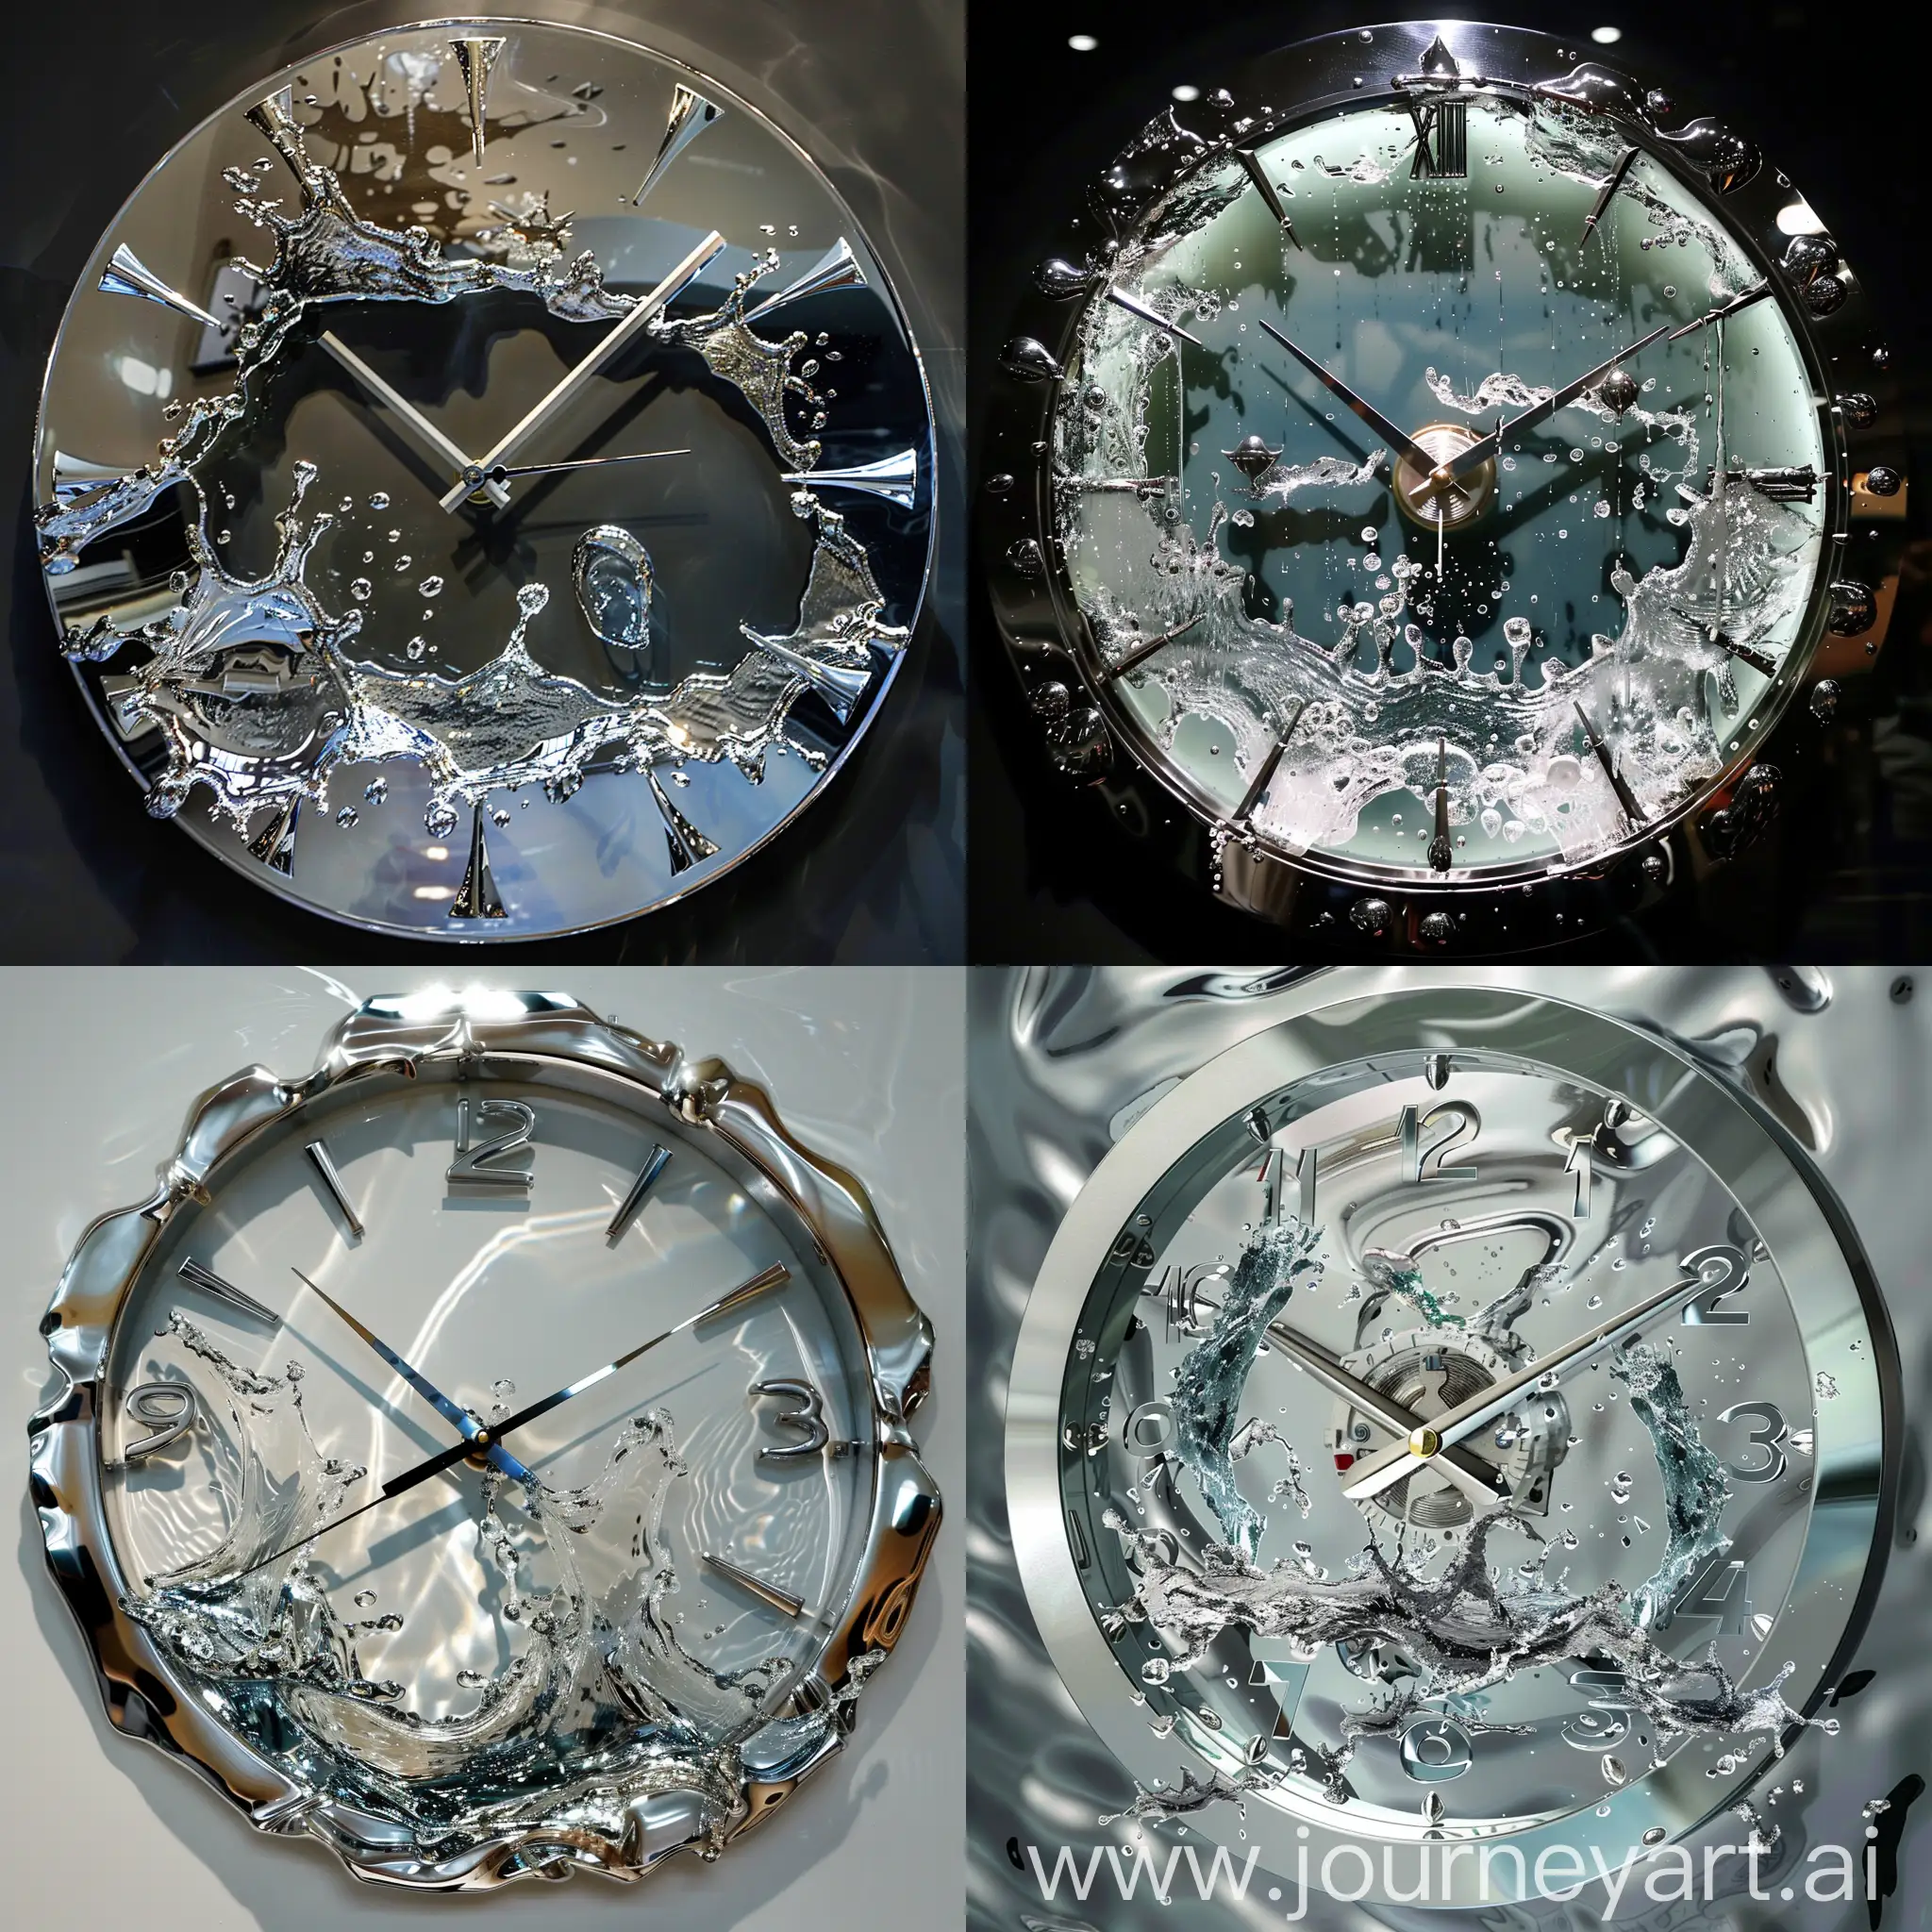 Maritime-Theme-Wall-Clock-with-Hyperrealistic-Water-Splashes